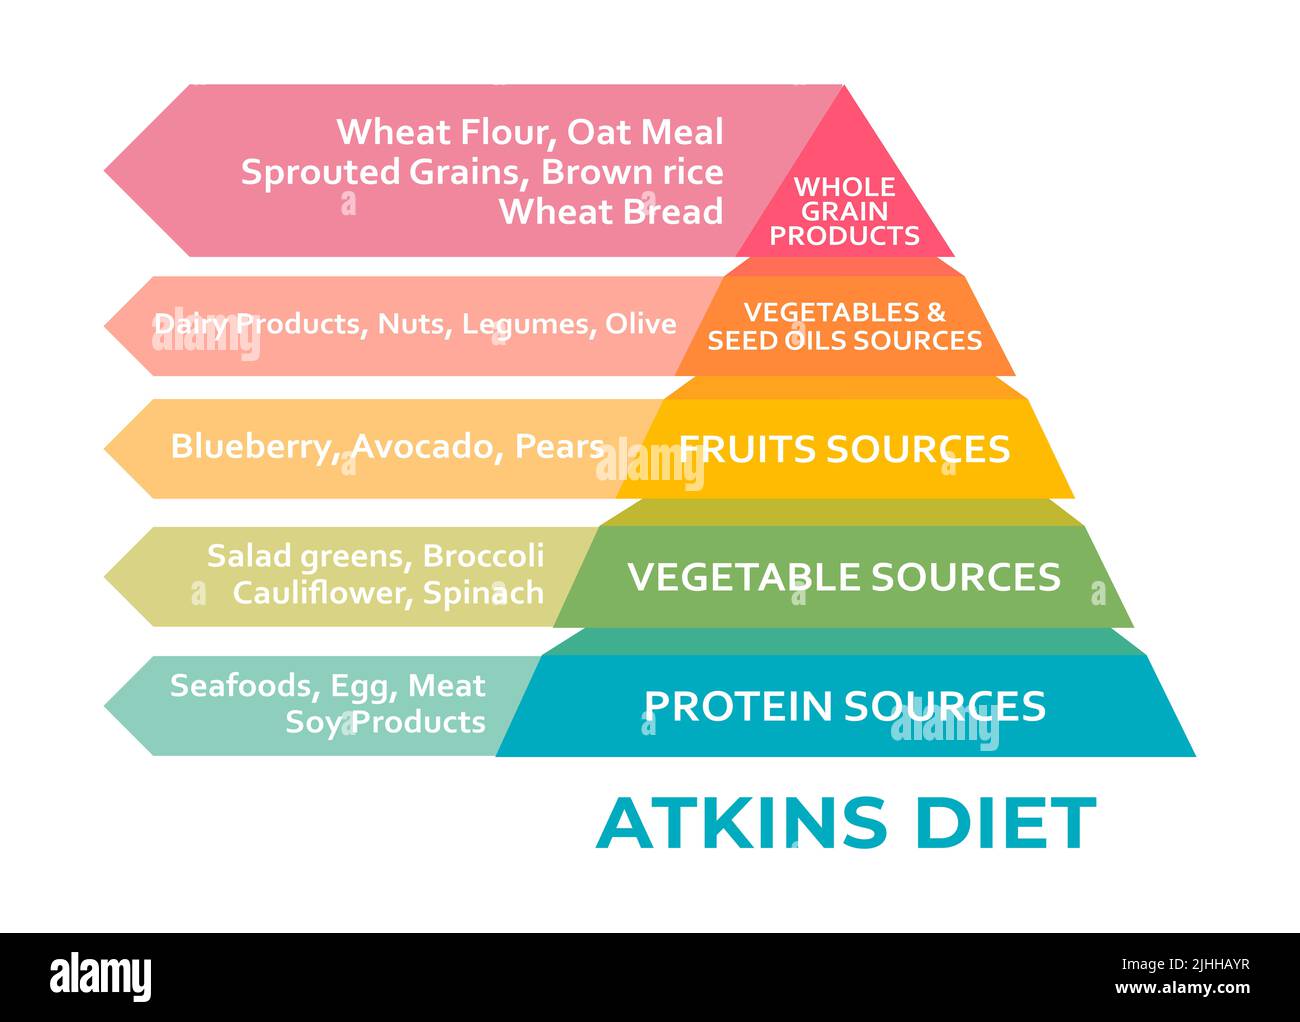 Atkins Diet pyramid, health conceptual. The aim is to lose weight by avoiding carbohydrates and controlling insulin levels Stock Photo